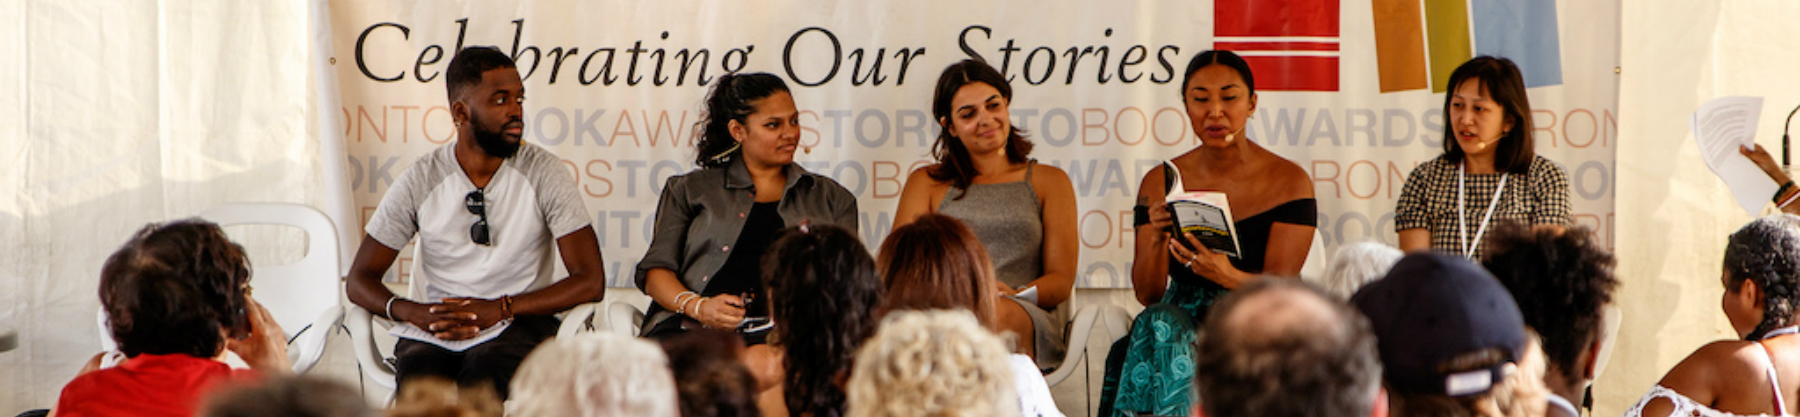 A panel of five authors sit on stage at the Word on the Street Book and Magazine Festival while answering questions from the audience.